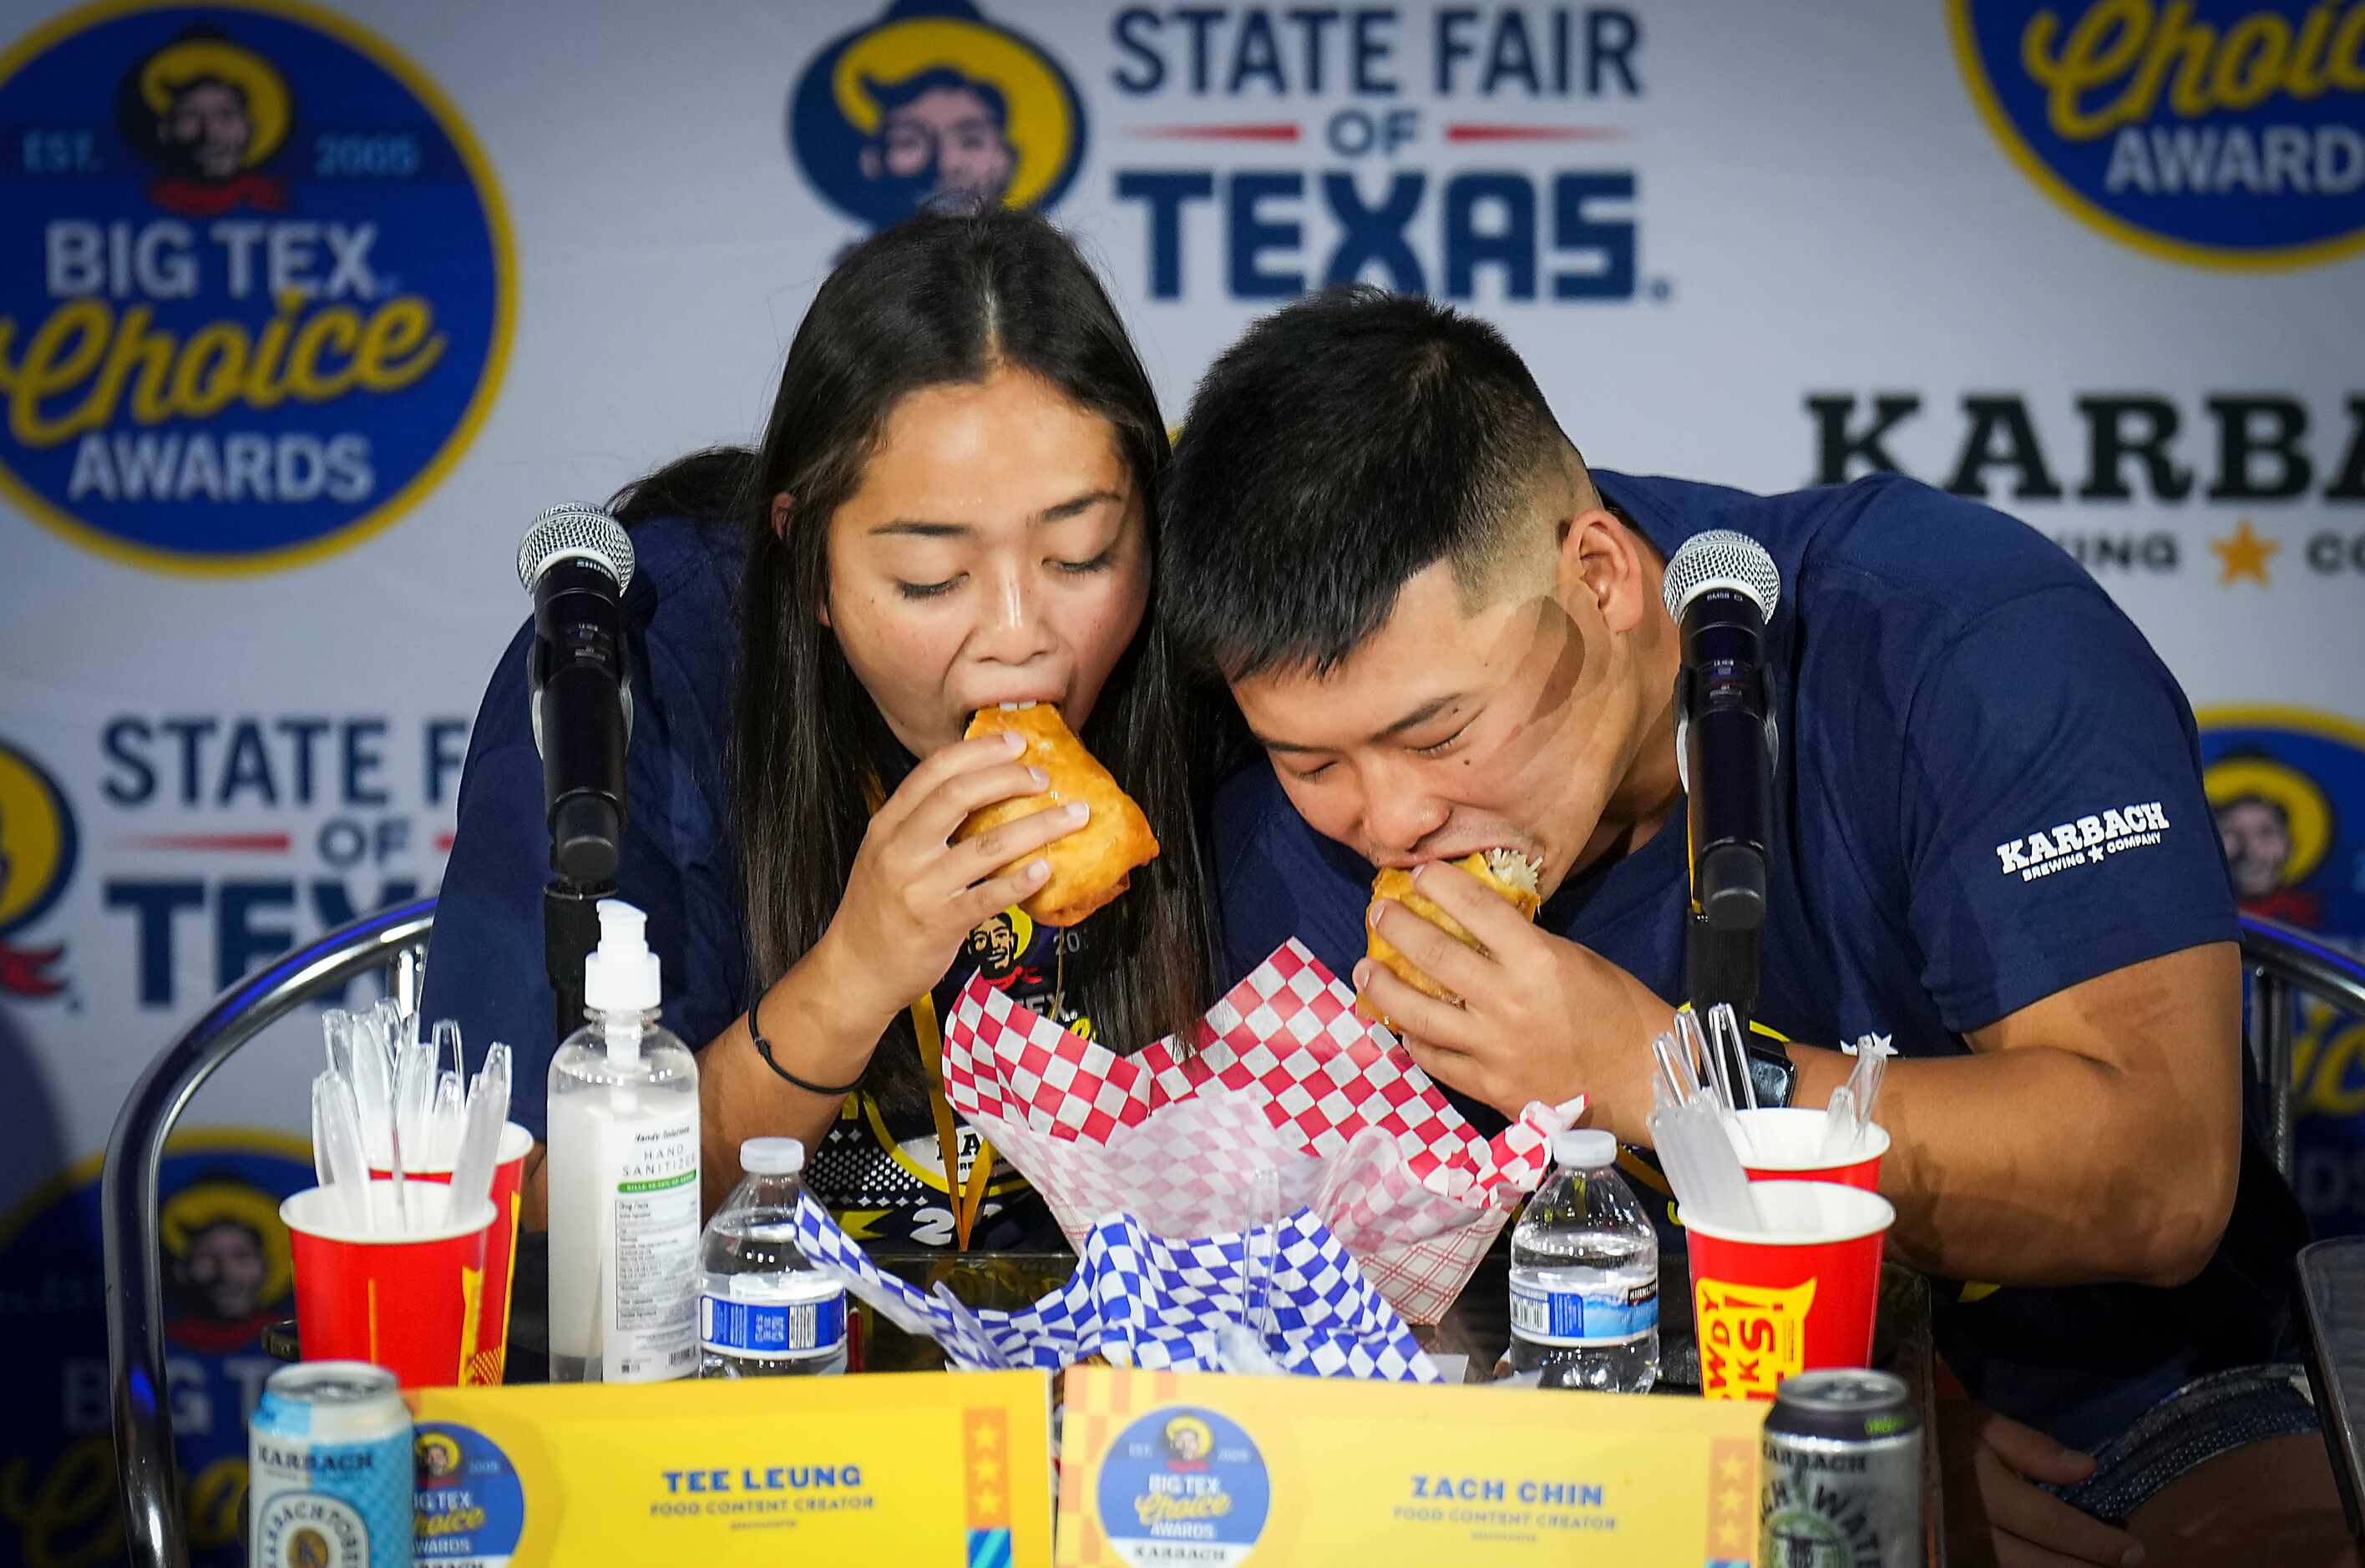 Judges Tee Leung and Zach Chin sample Deep Fried Pho by Michelle Le Michelle, the winner of...